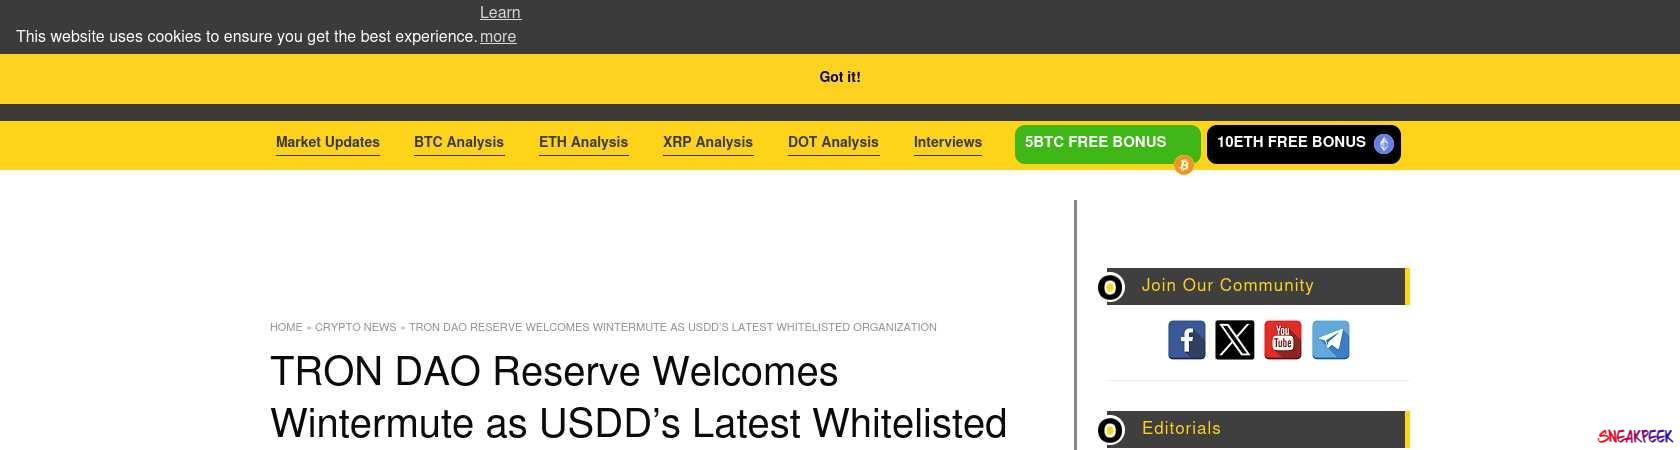 Read the full Article:  ⭲ TRON DAO Reserve Welcomes Wintermute as USDD’s Latest Whitelisted Organization